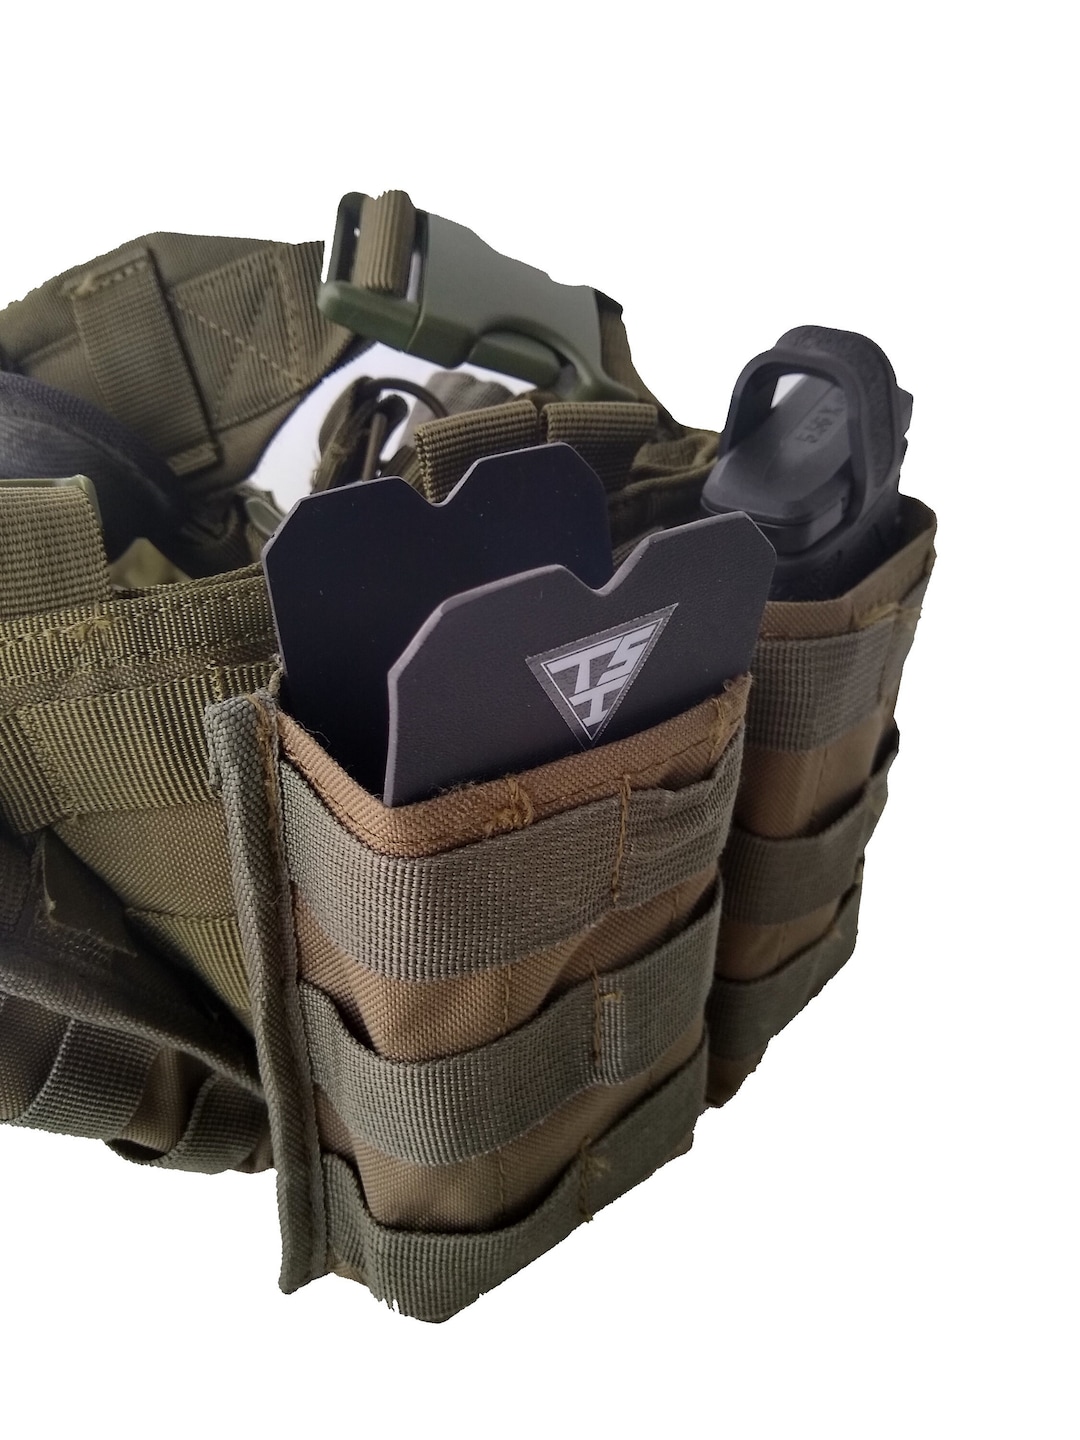 Kydex Molle Panel Backpack Insert